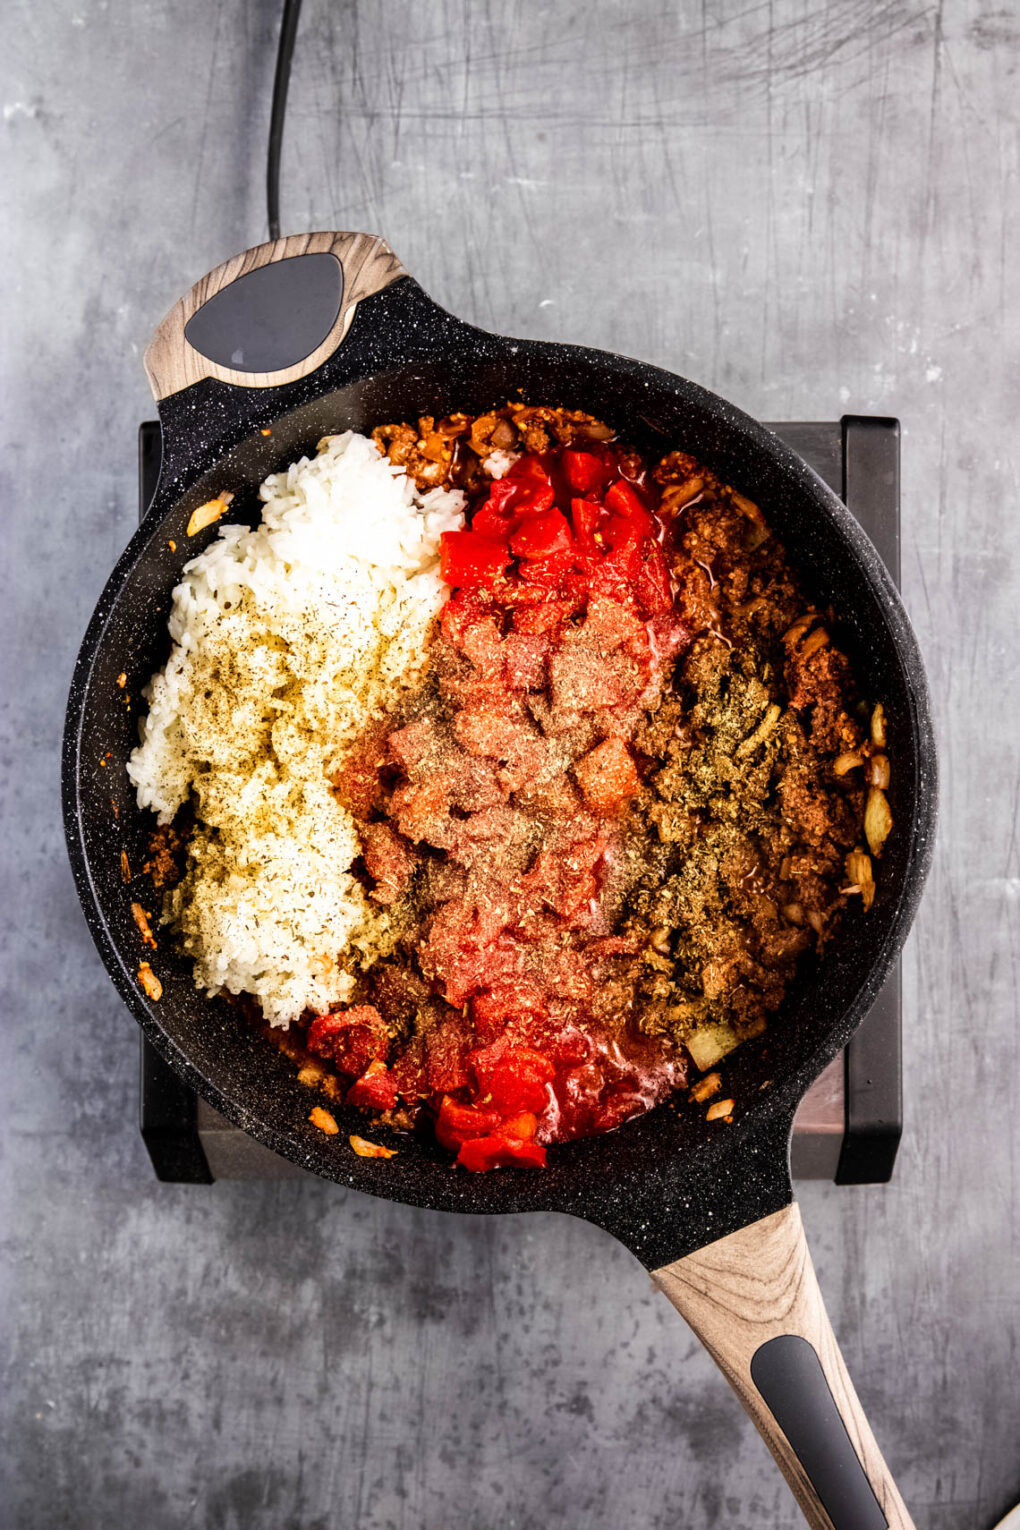 Meat separated with the tomatoes, seasonings, and rice in a skillet